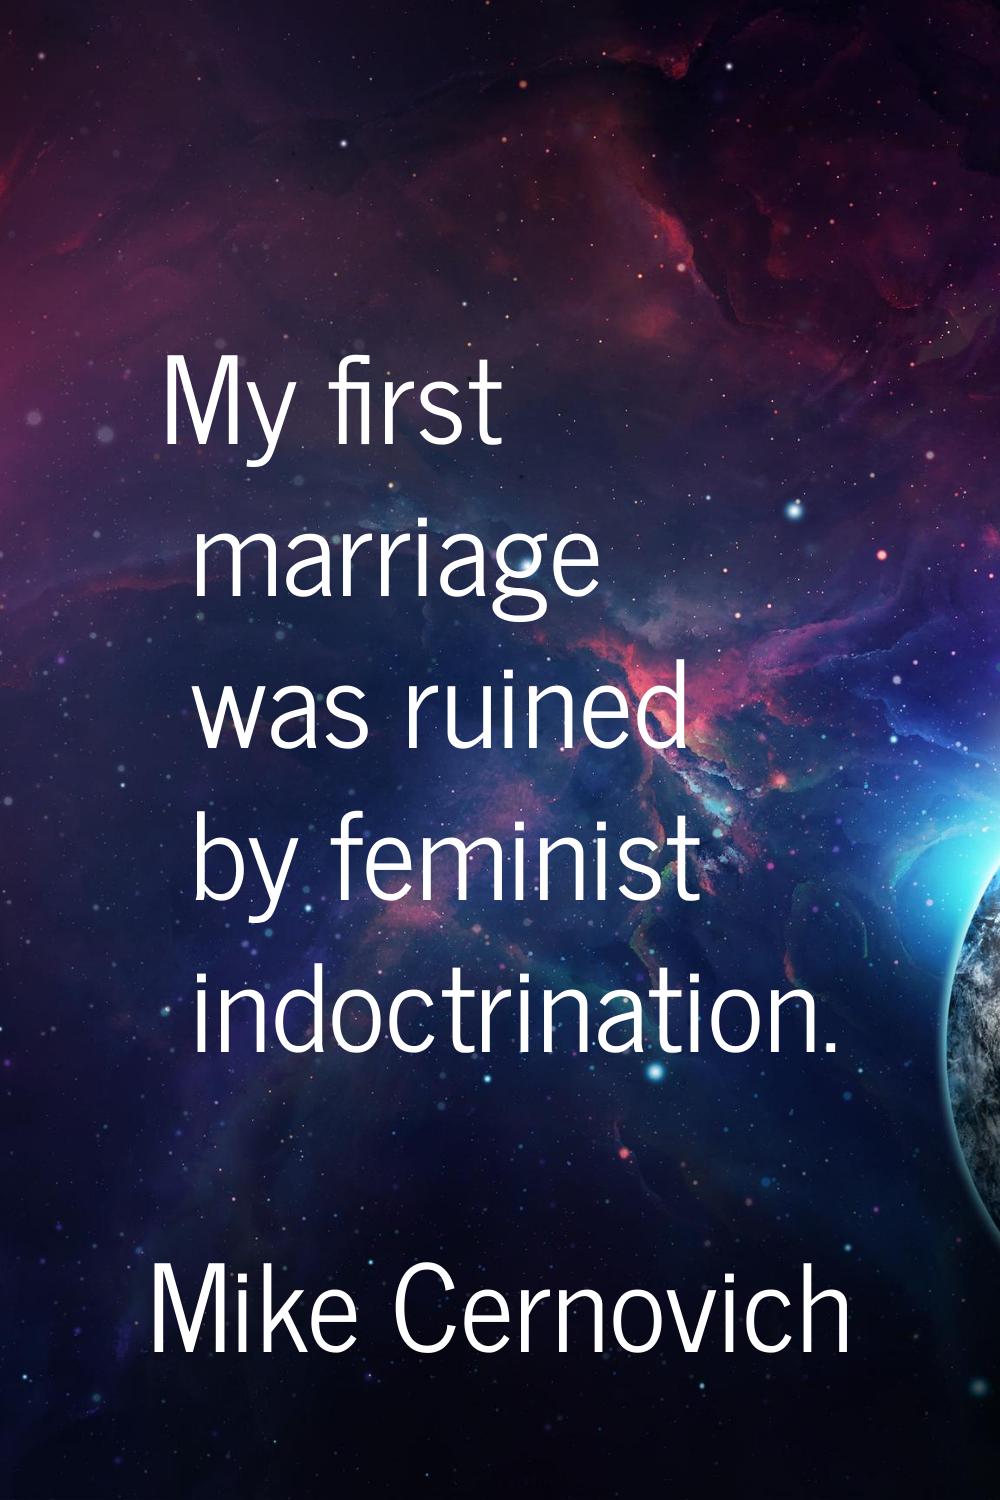 My first marriage was ruined by feminist indoctrination.